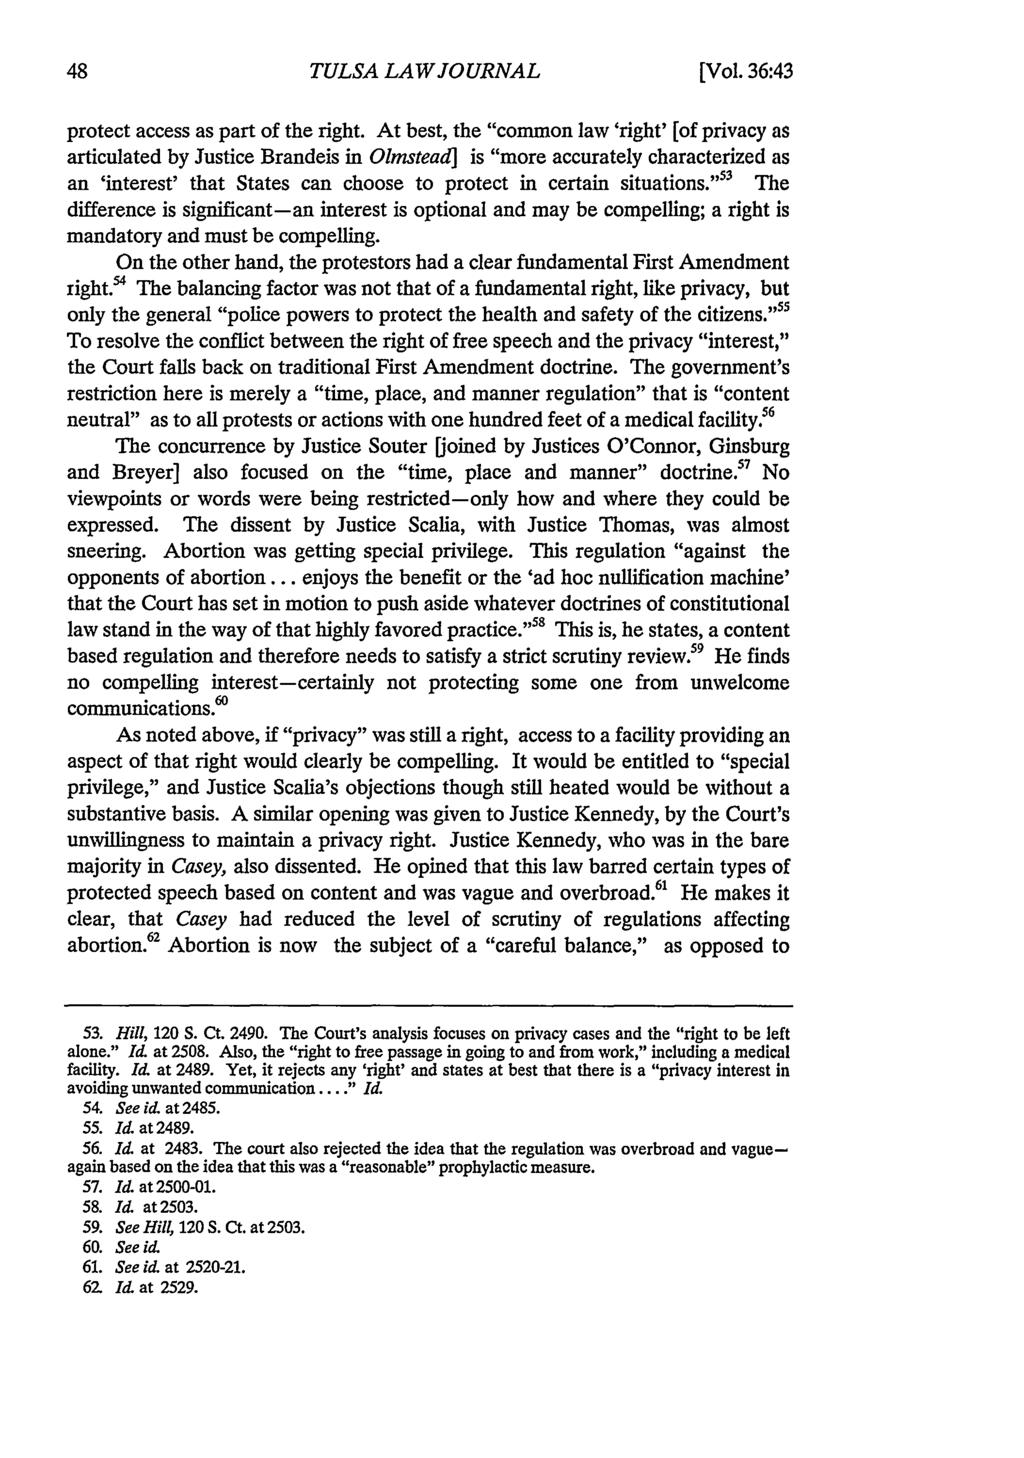 Tulsa Law Review, Vol. 36 [2000], Iss. 1, Art. 3 TULSA LAW JOURNAL [Vol. 36:43 protect access as part of the right.